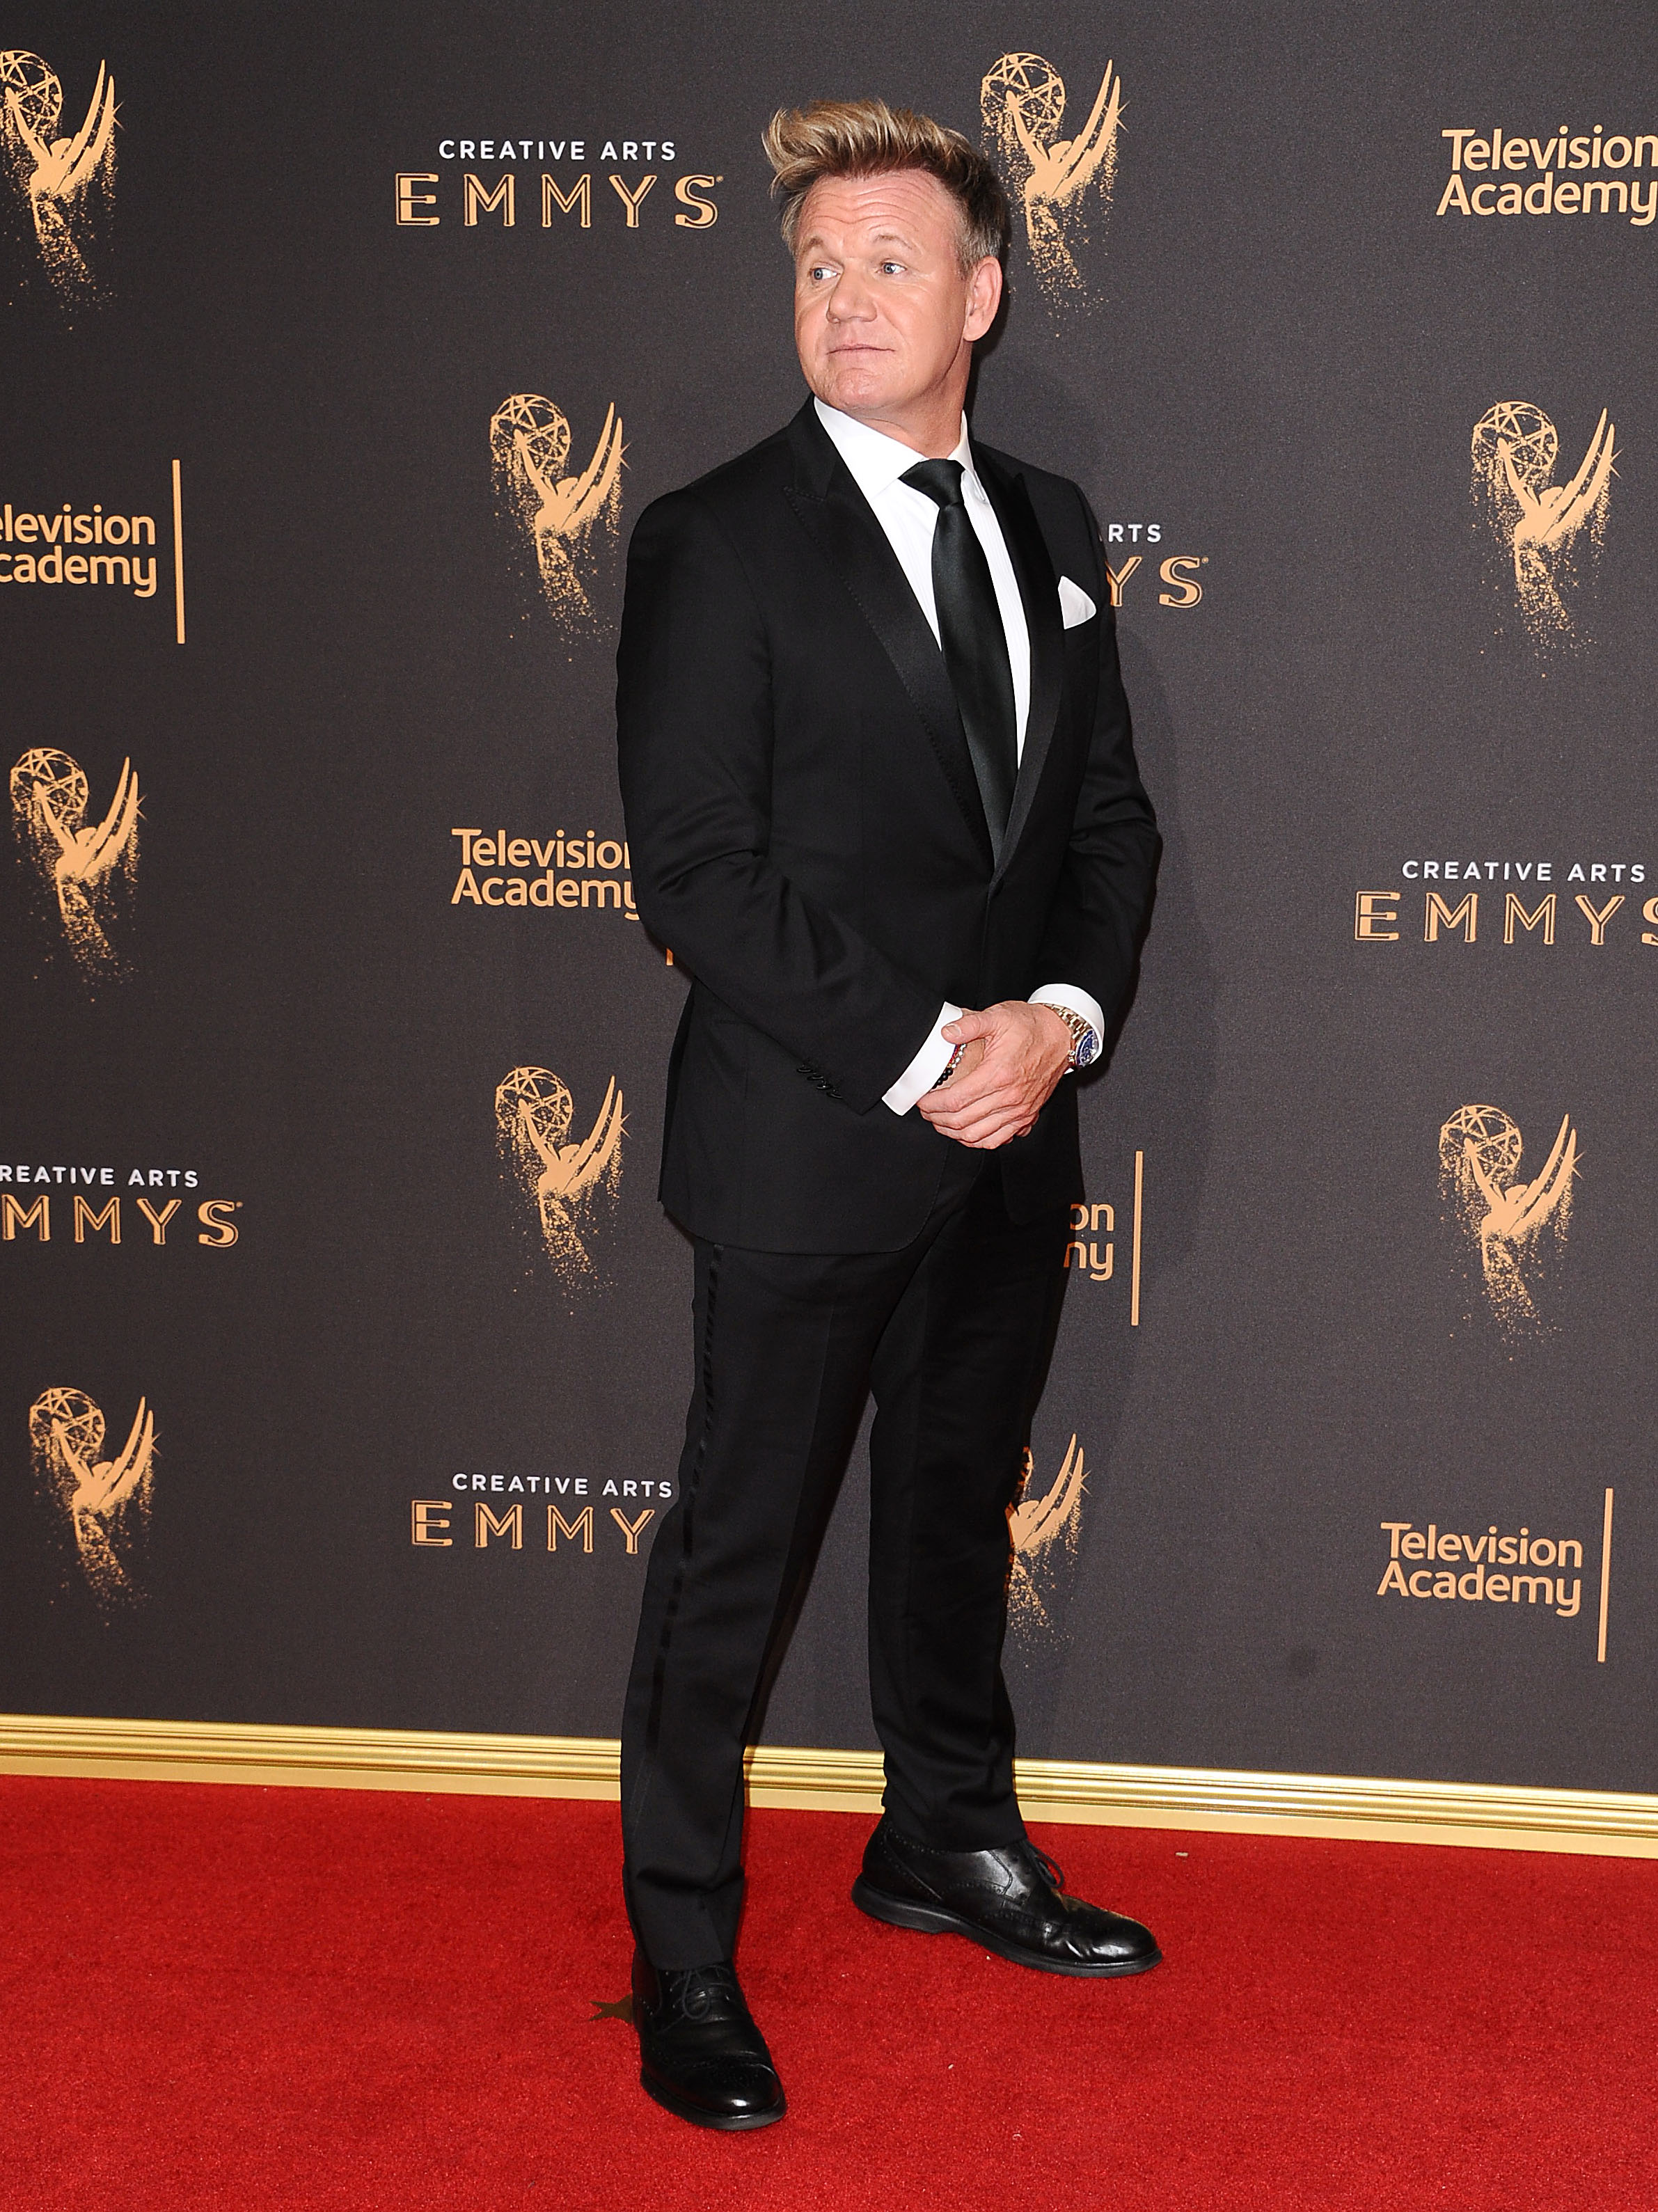 Gordon Ramsay at the Creative Arts Emmy Awards in Los Angeles, California on September 9, 2017 | Source: Getty Images